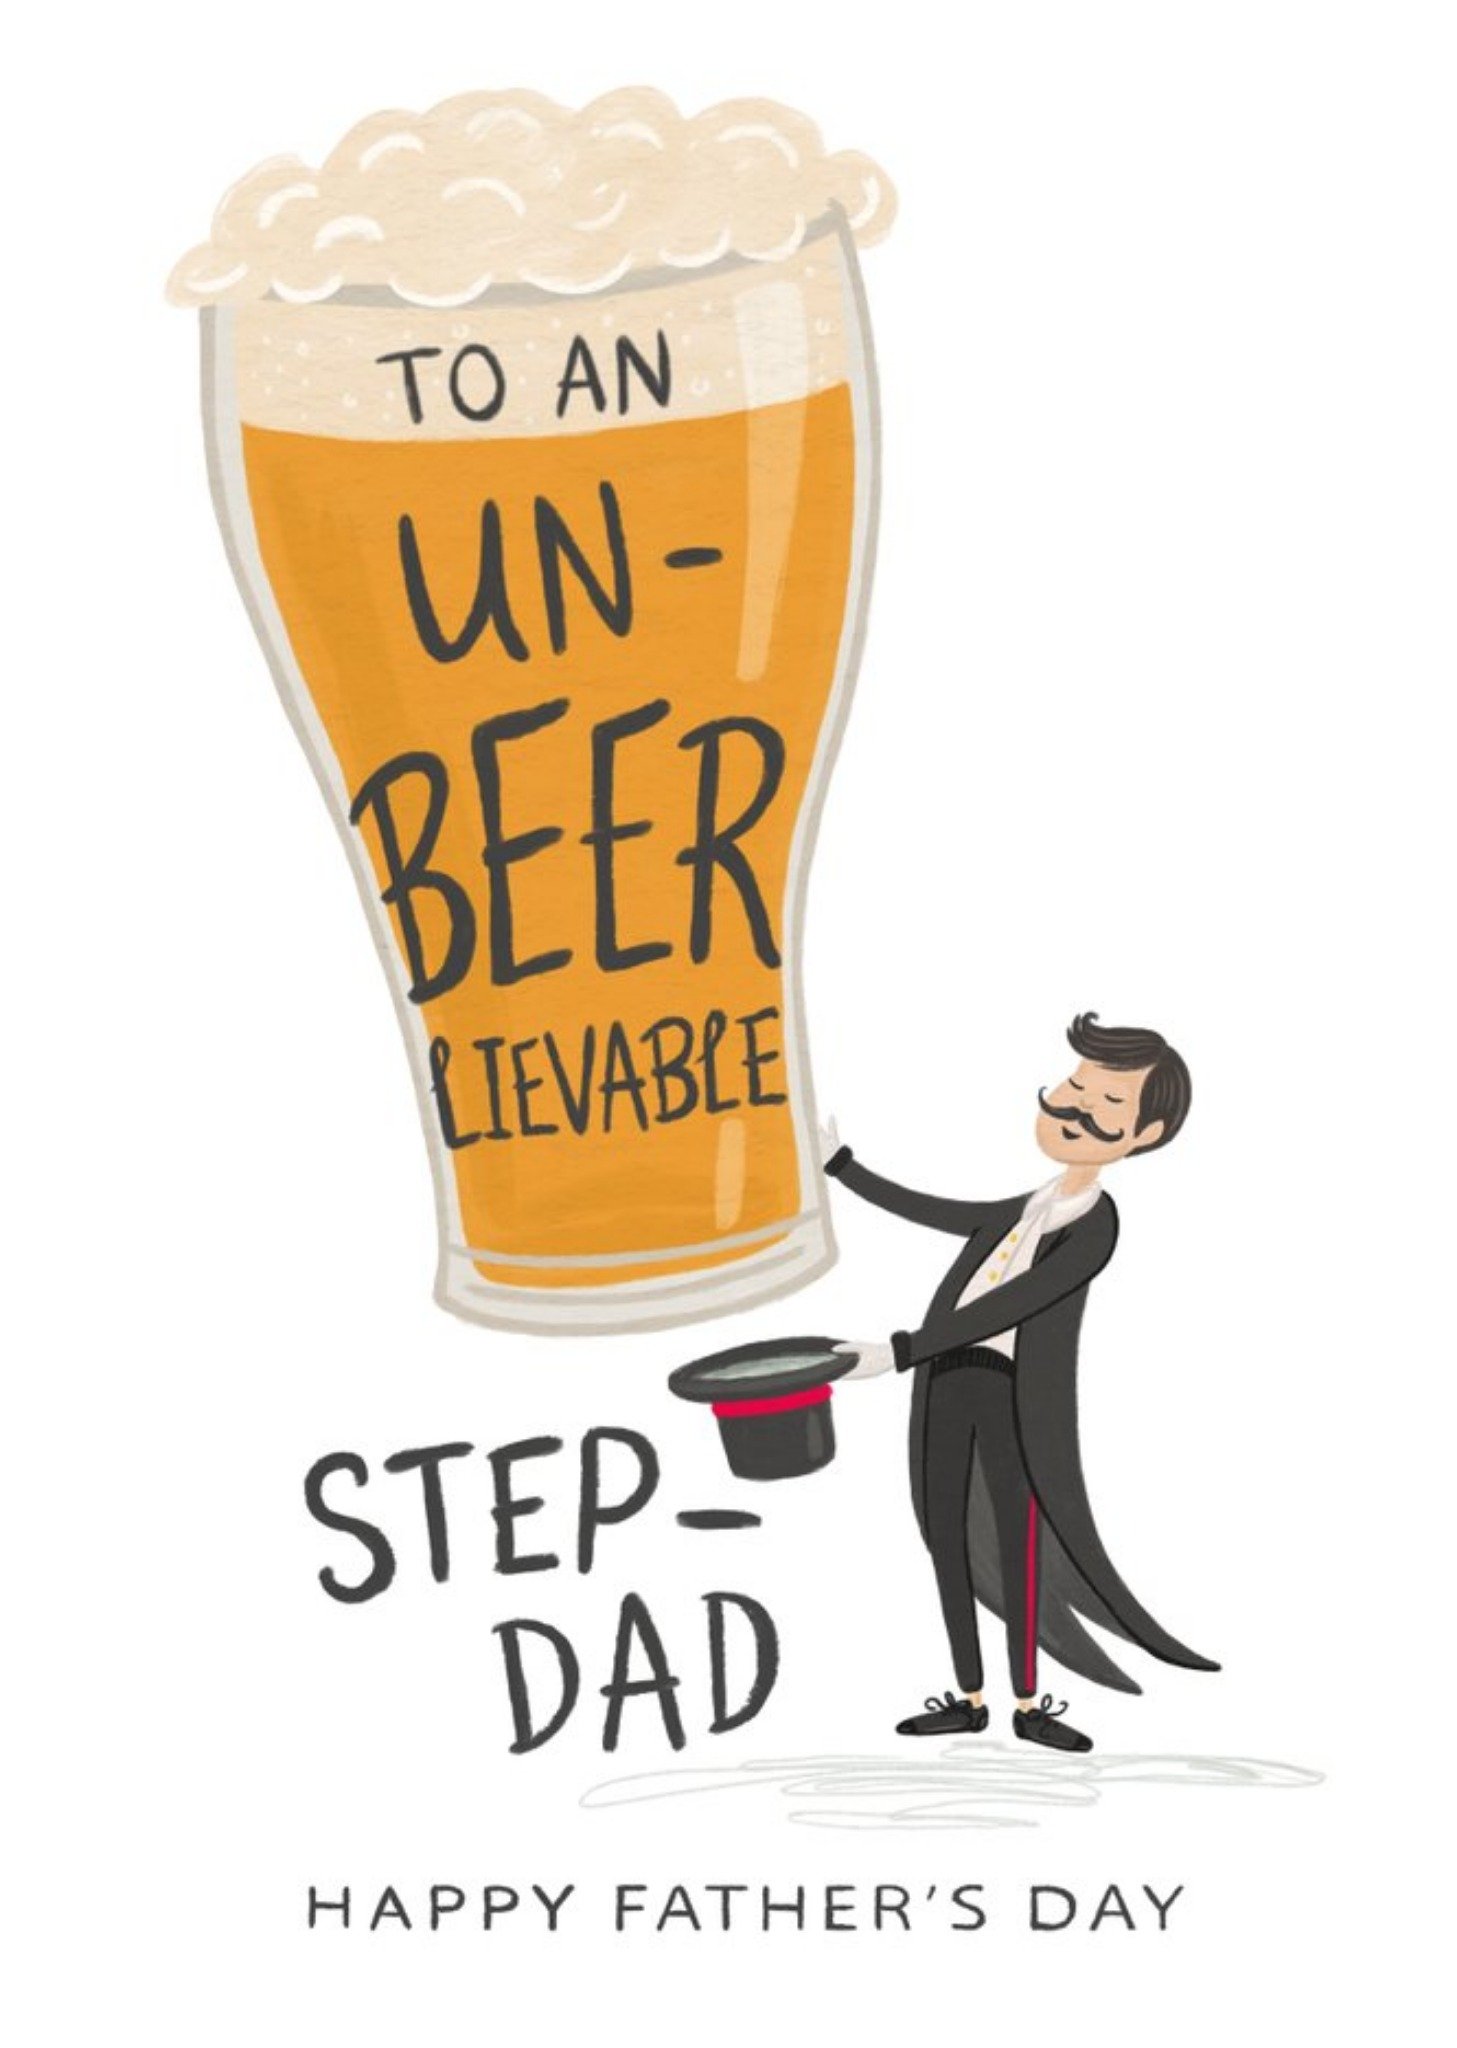 Moonpig Un-Beer Lievable Step-Dad Father's Day Card Ecard